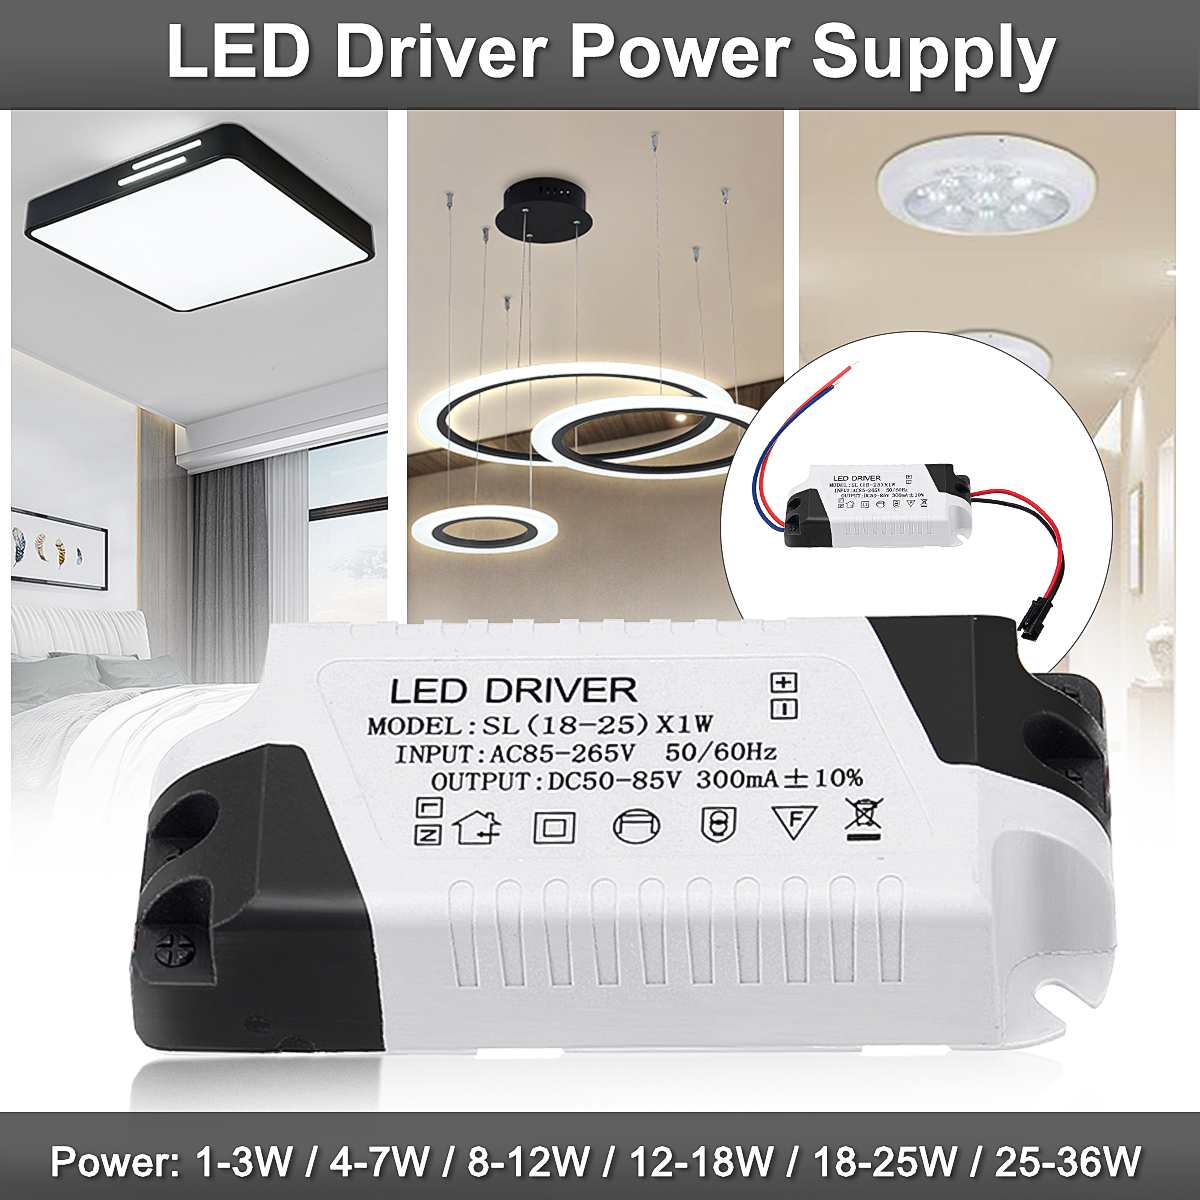 Led Constant Driver 1-3W 4-7W 8-12W 12-18W 18-25W 25-36W Voeding Licht Voor Led Downlight Verlichting AC85-265V